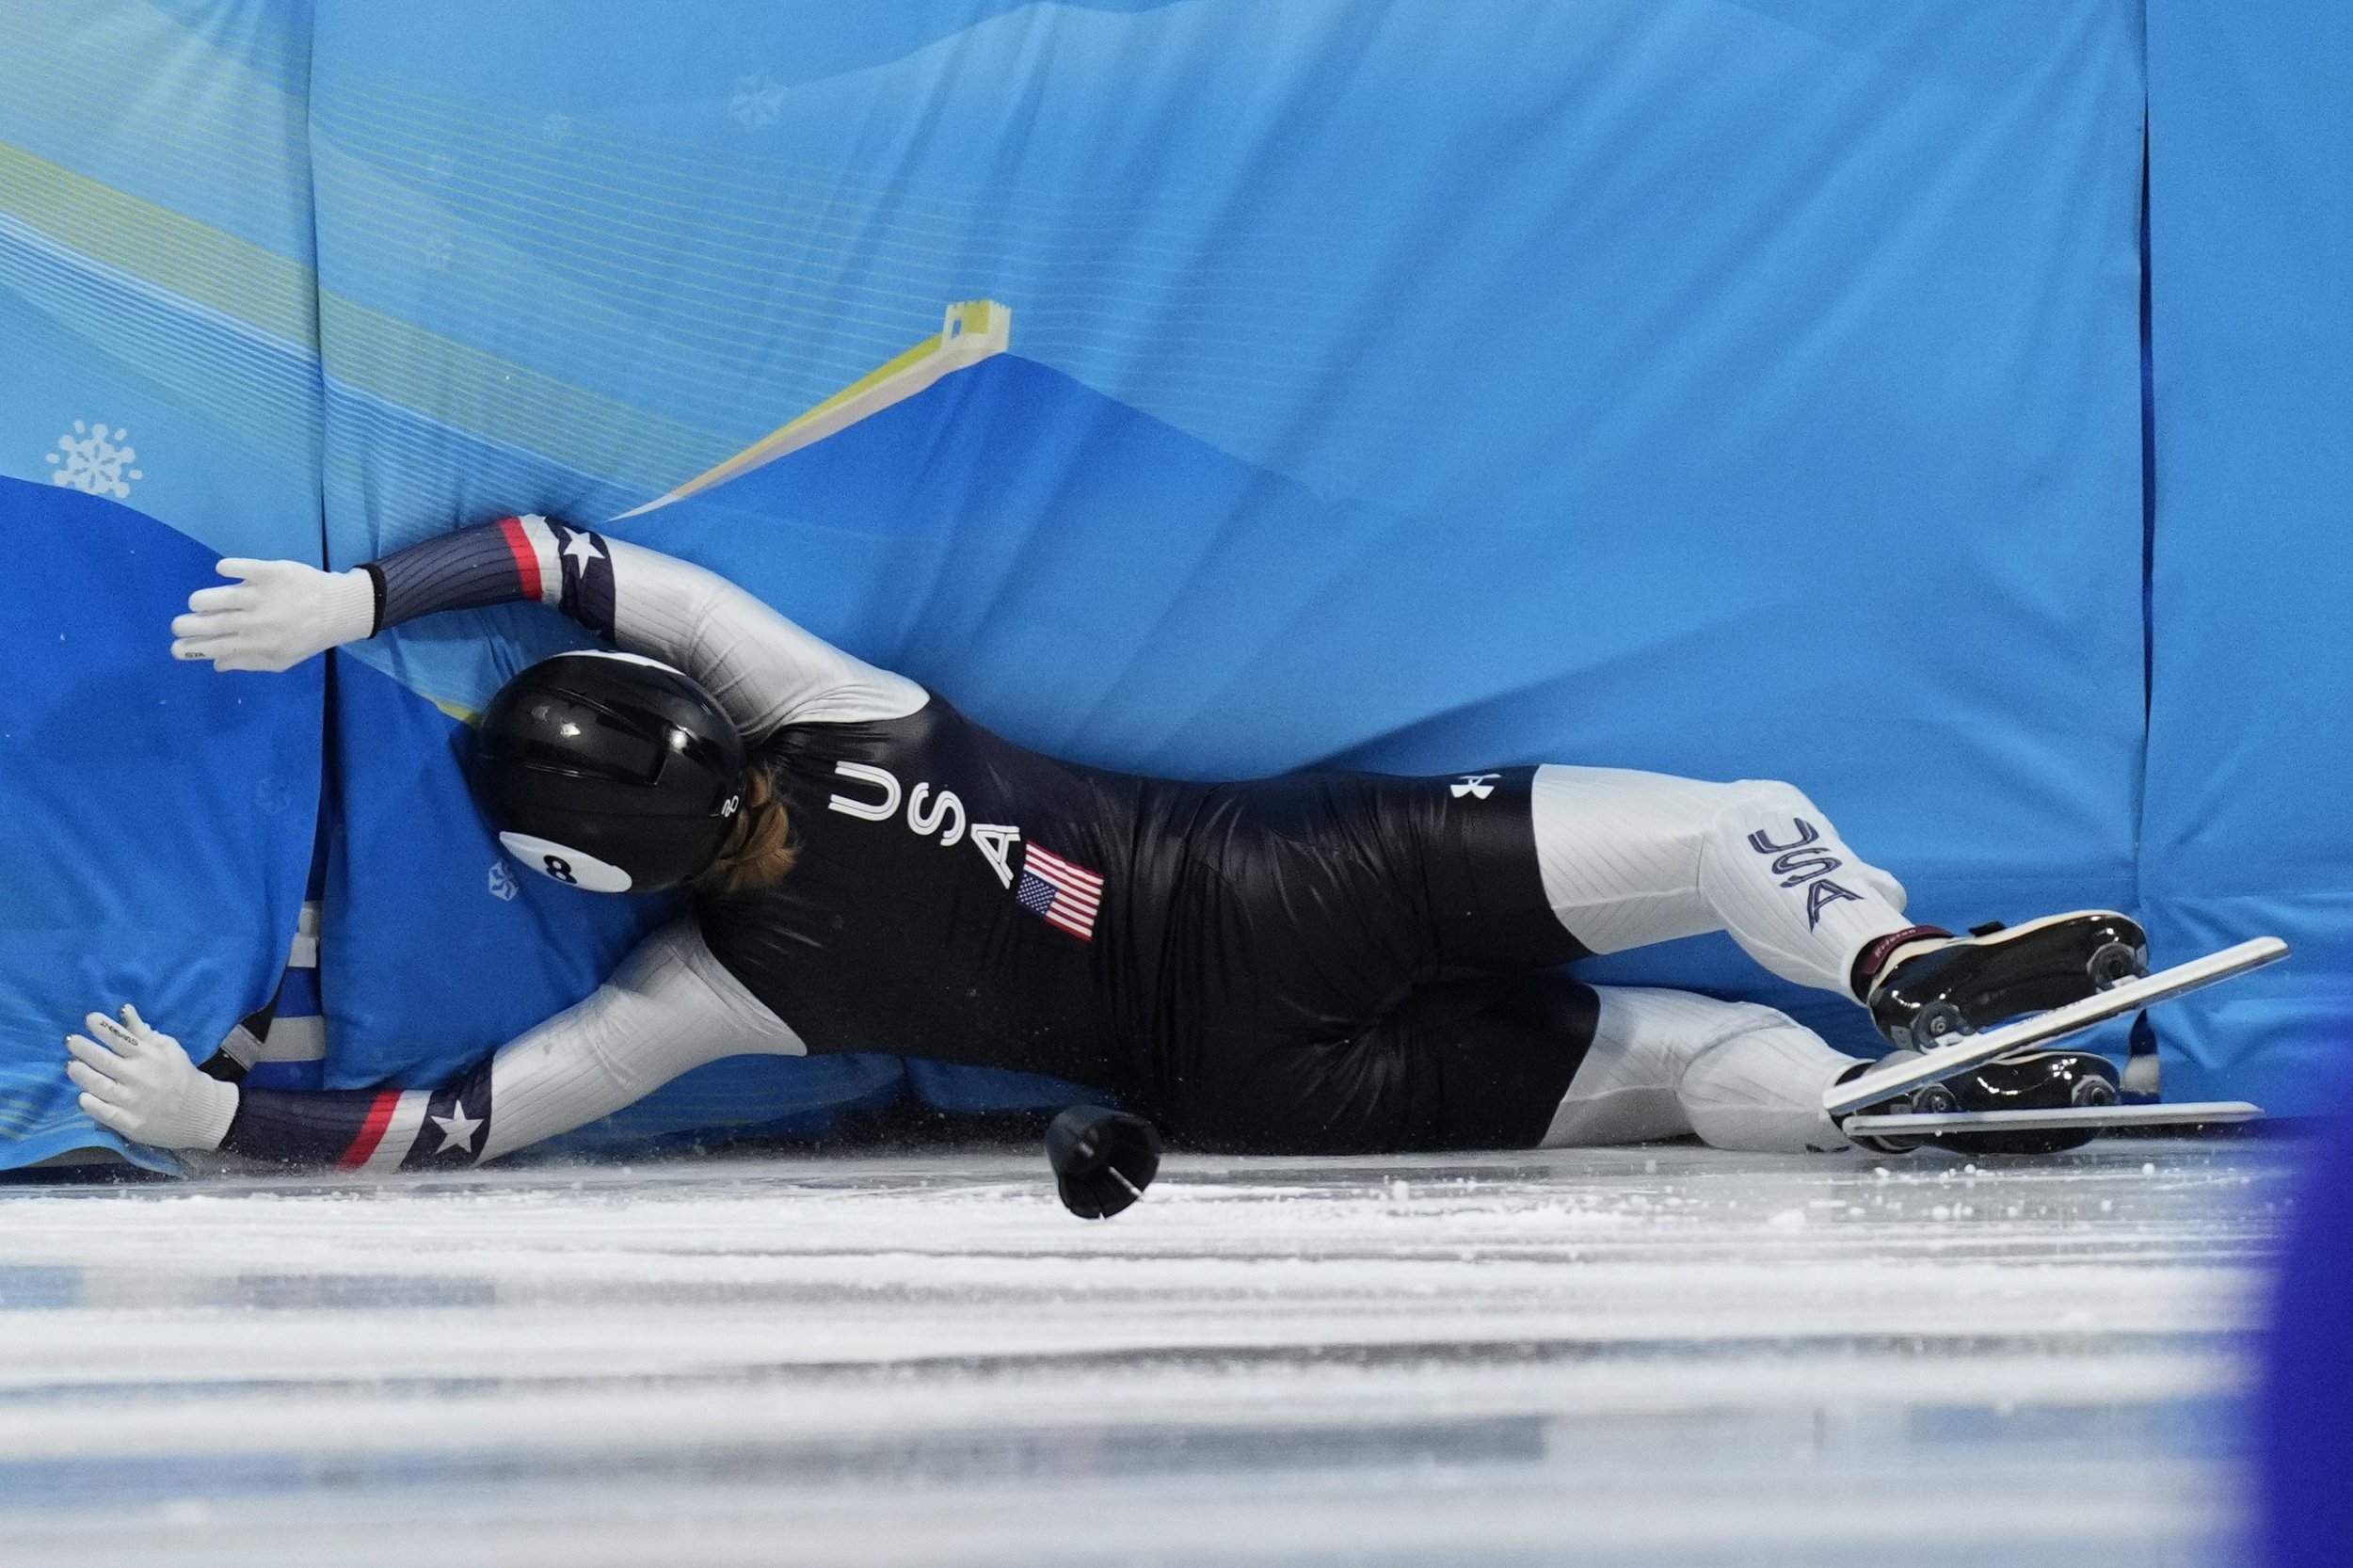  Kristen Santos of the United States, crashes in the in the women's 3000-meters relay B final during the short track speedskating competition at the 2022 Winter Olympics, Sunday, Feb. 13, 2022, in Beijing. (AP Photo/Bernat Armangue) 